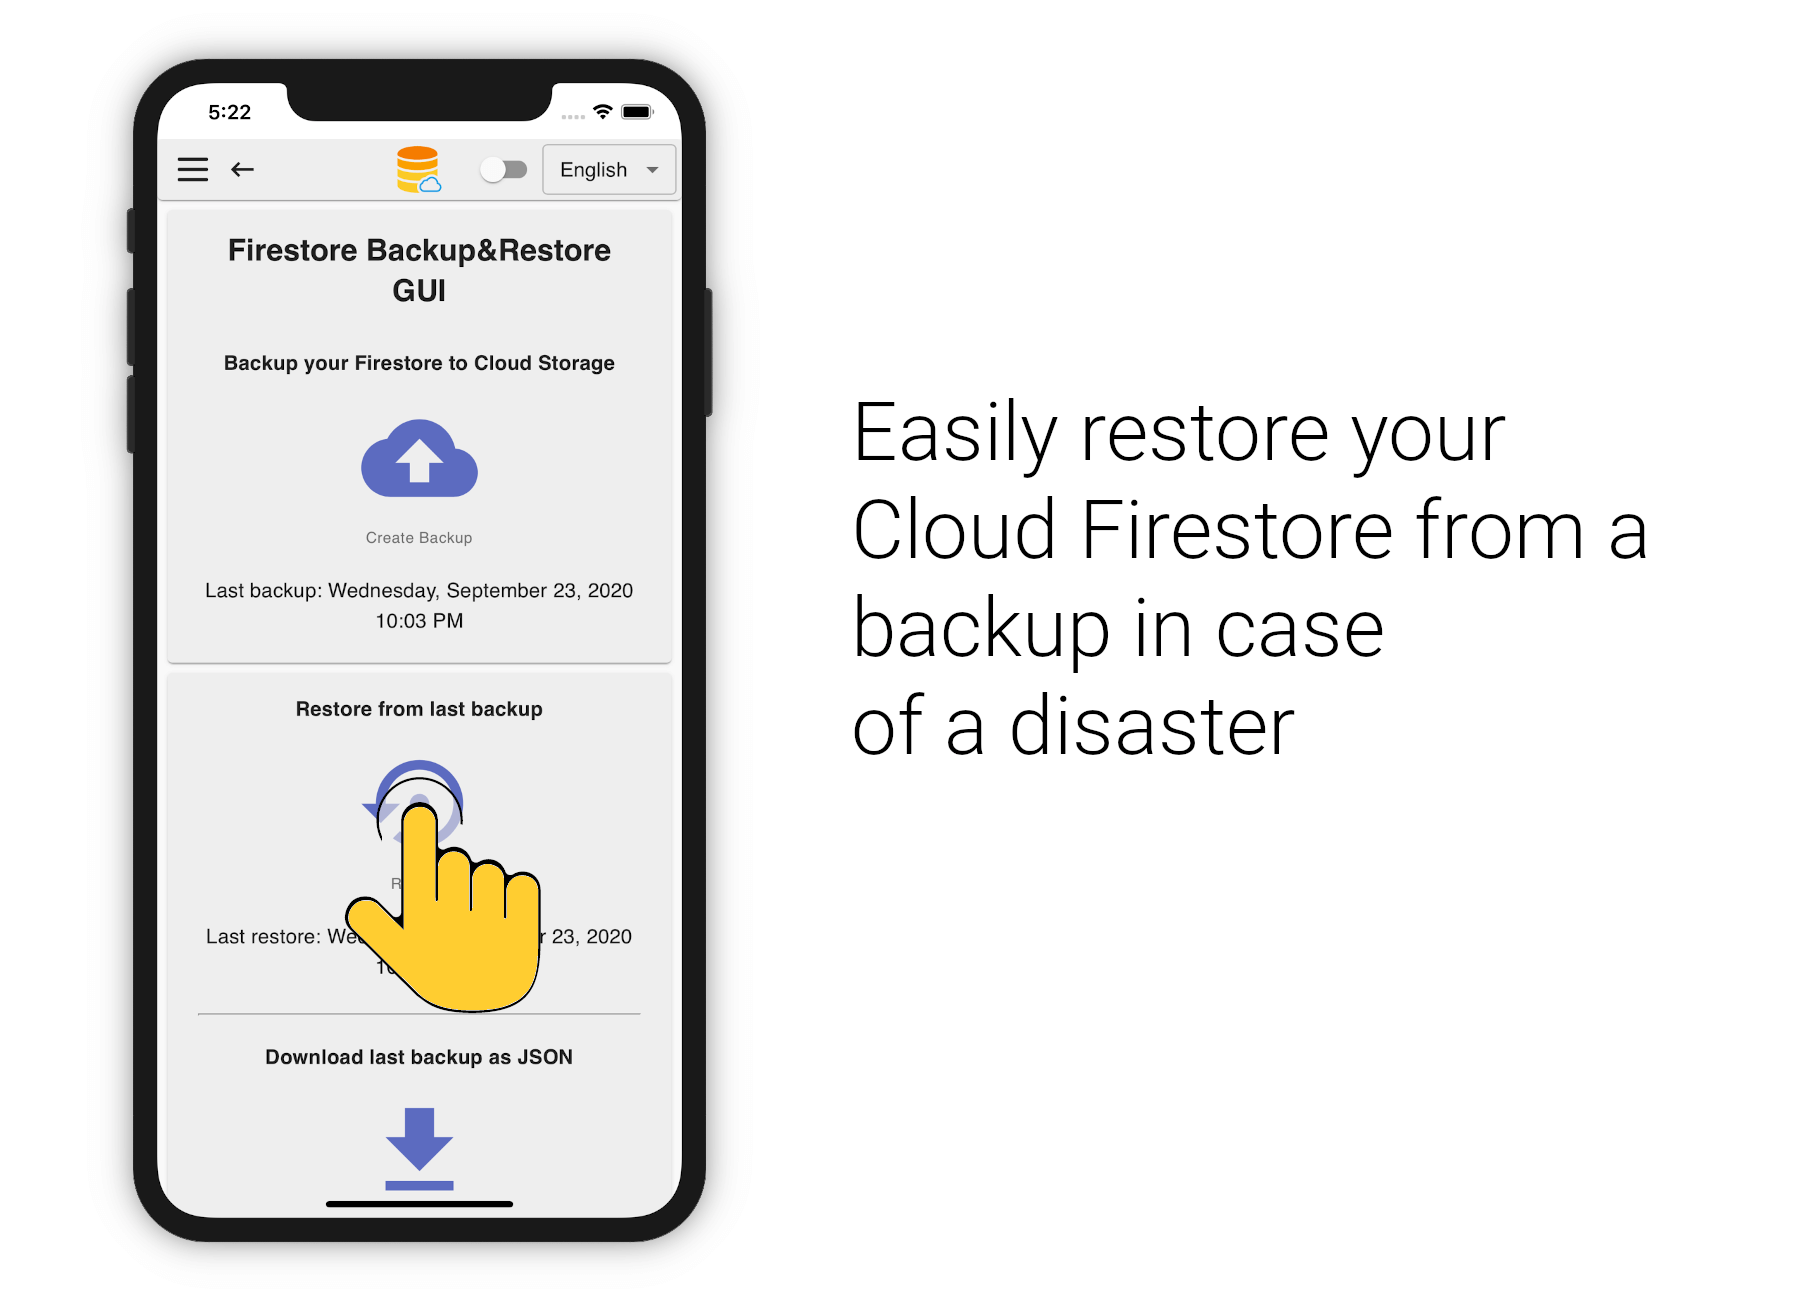 Firebase restore Cloud Firestore with a single click from your Google Cloud Storage